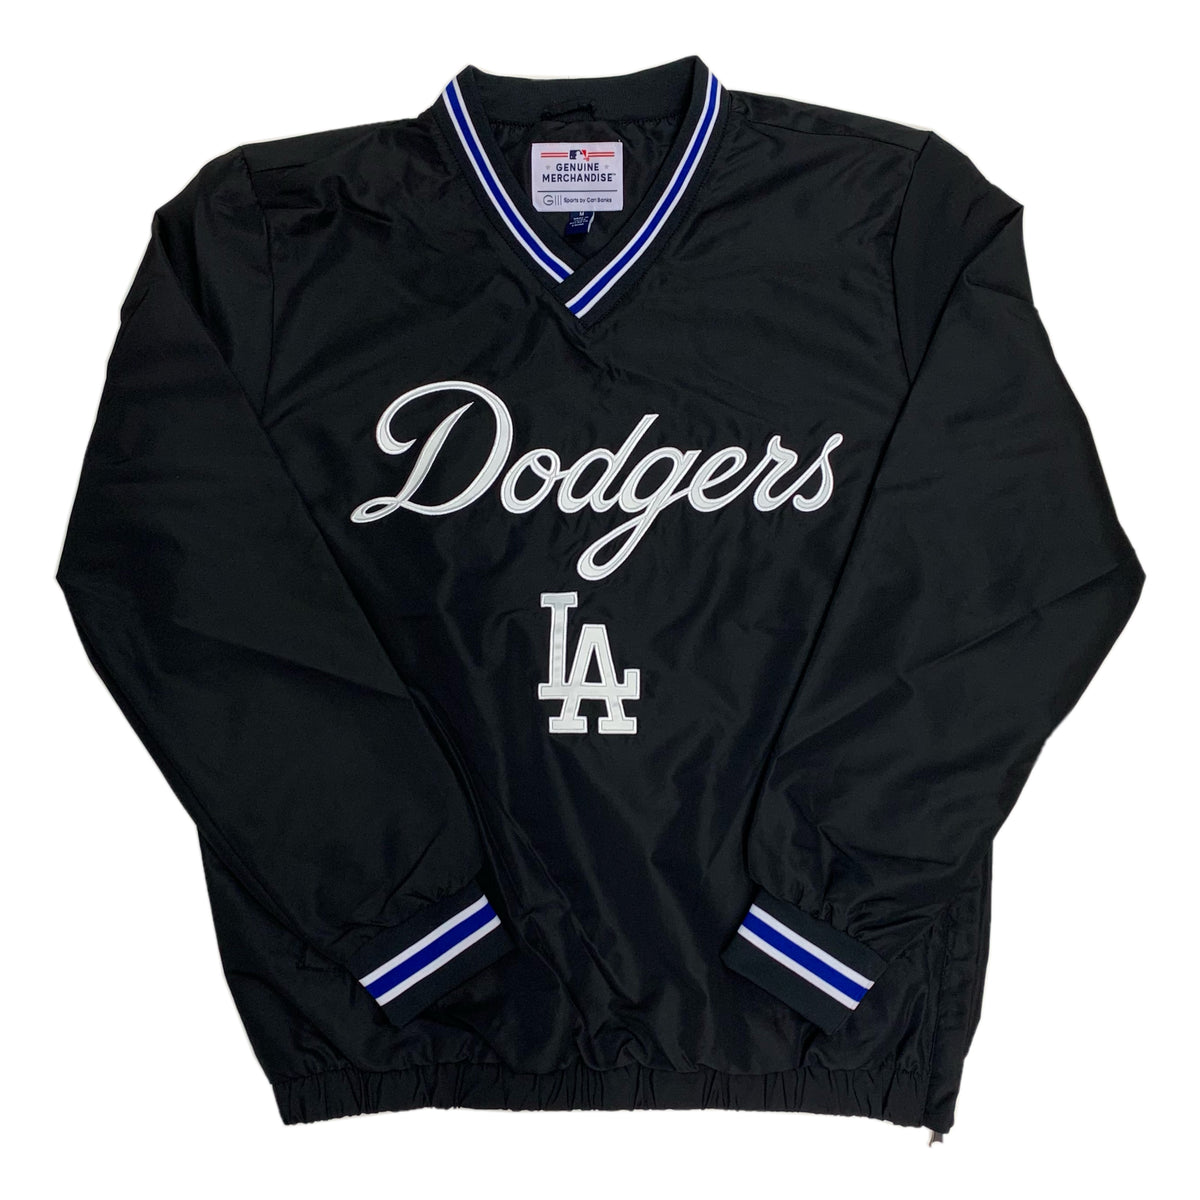 Los Angeles Dodgers MLB Authentic Team Name and Logo Shirt